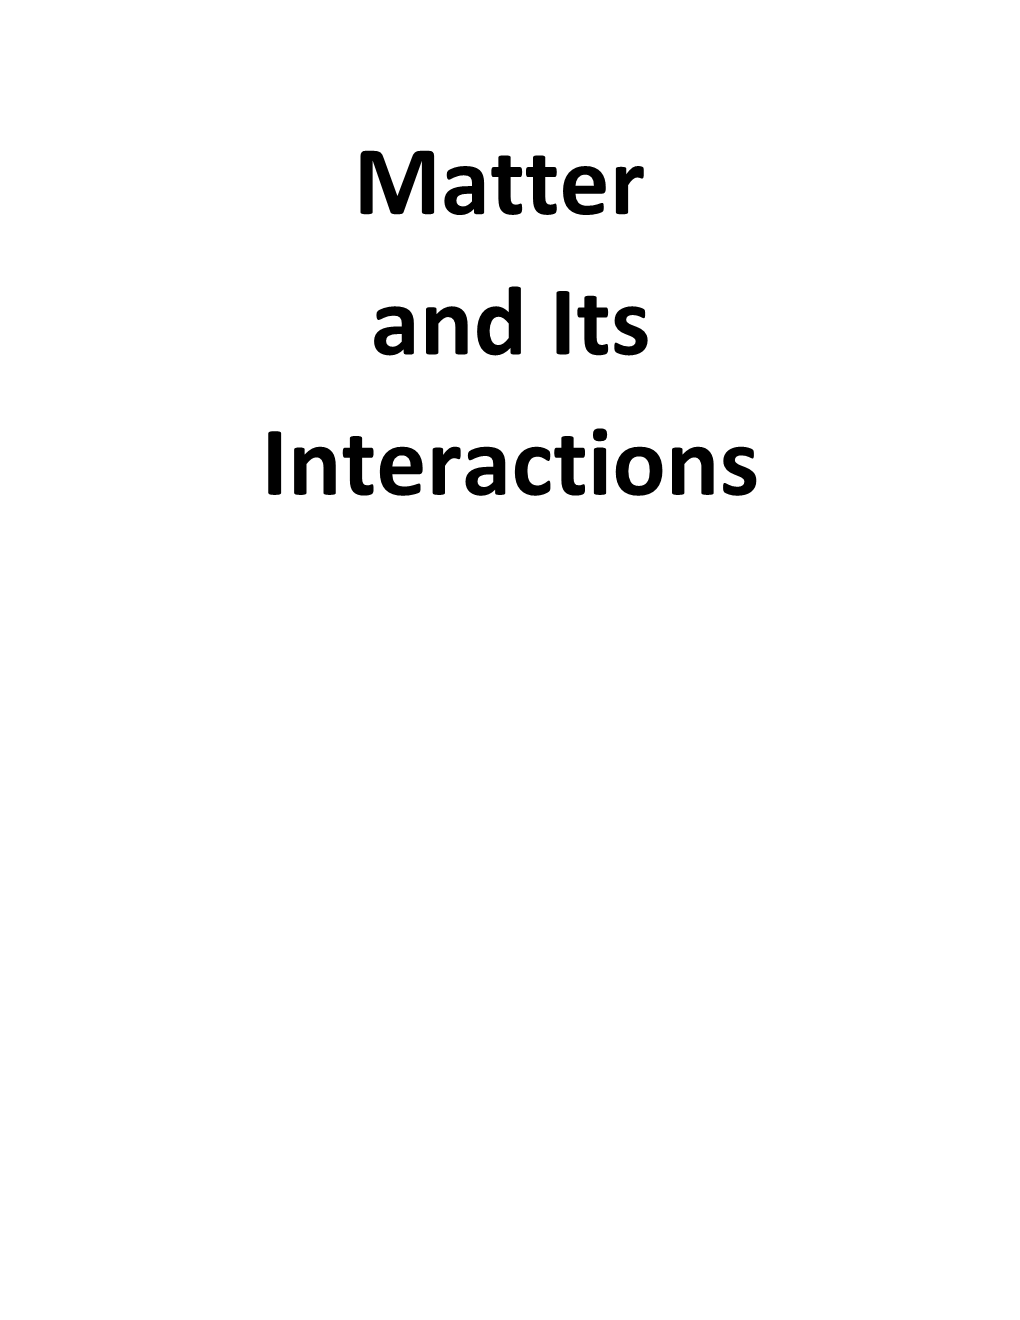 Matter and Its Interactions